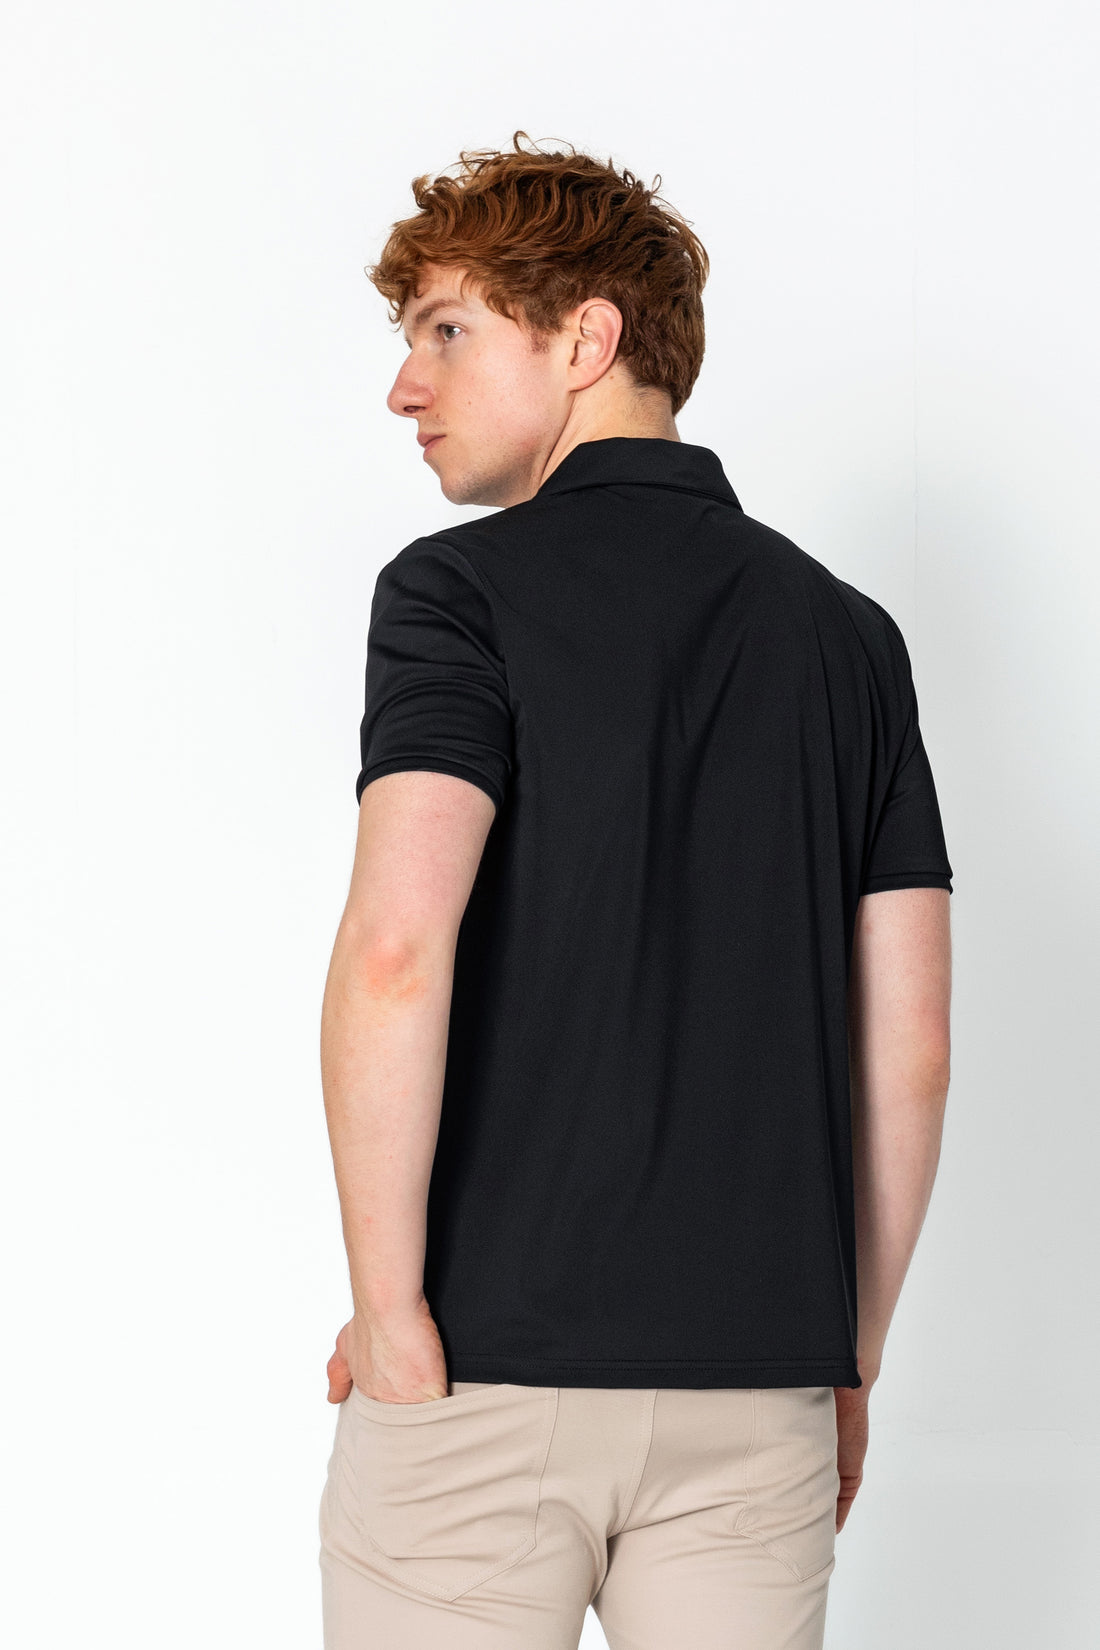 Wrinkle Free Tapered Travel Polo Shirts - Black